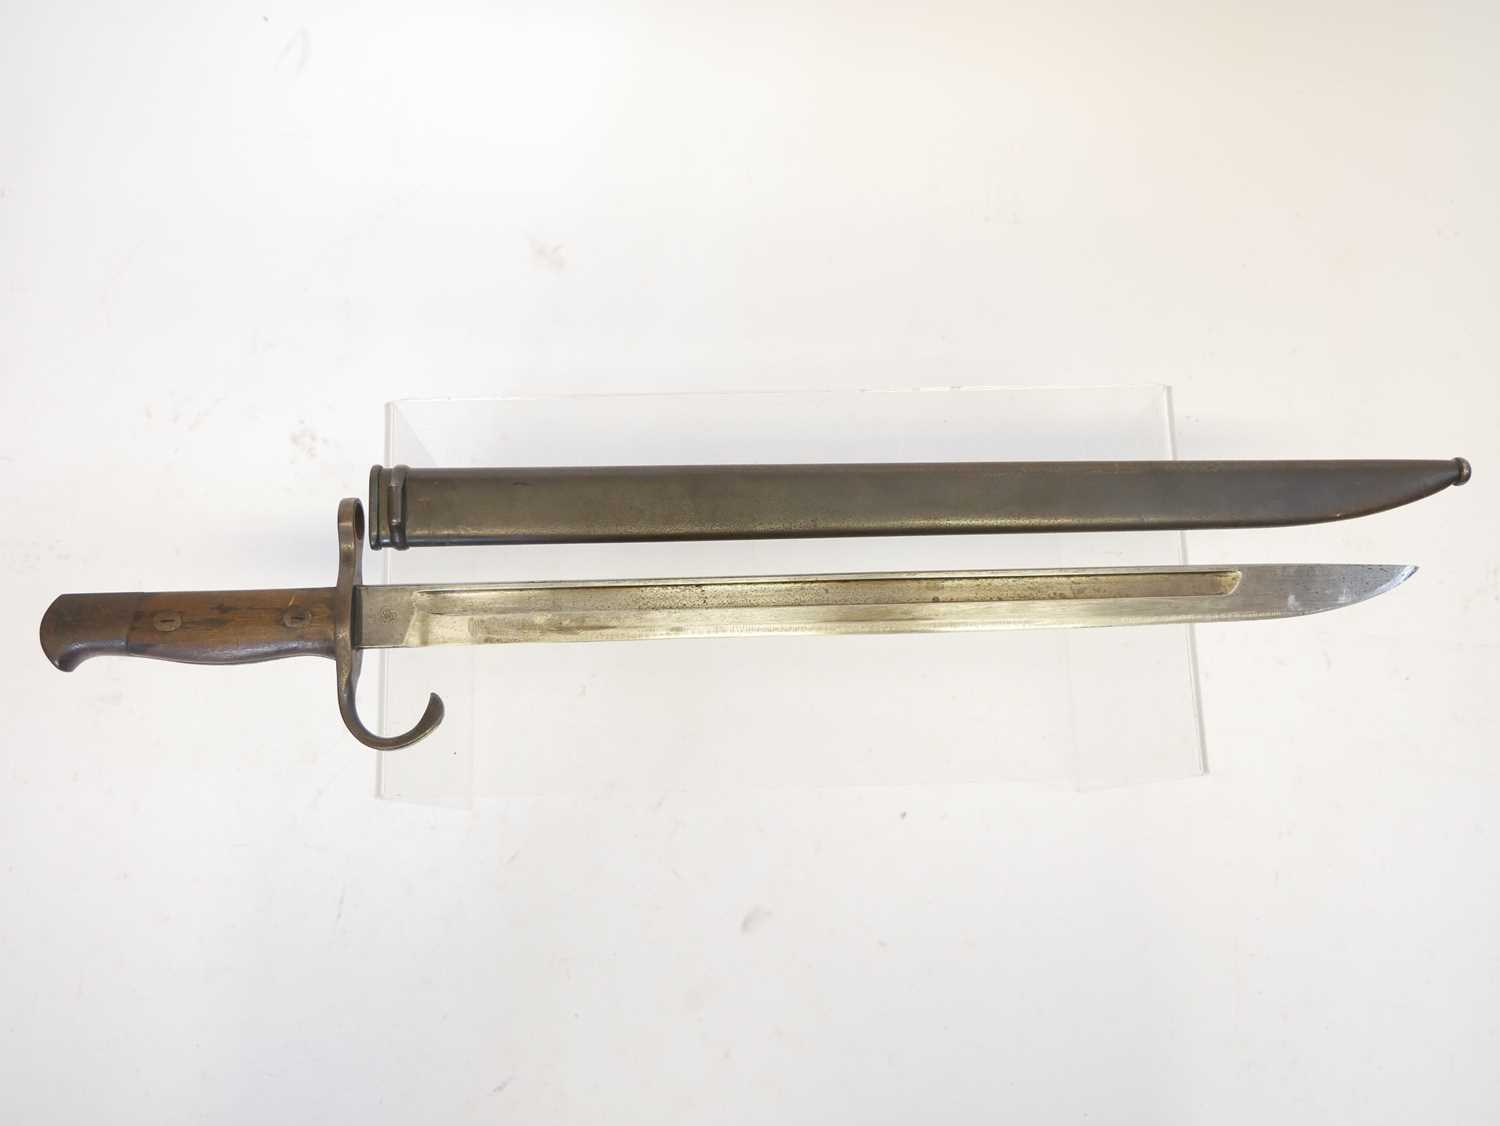 Japanese Arisaka type 30 bayonet and scabbard. Buyer must be over the age of 18. Age verification ID - Image 2 of 9